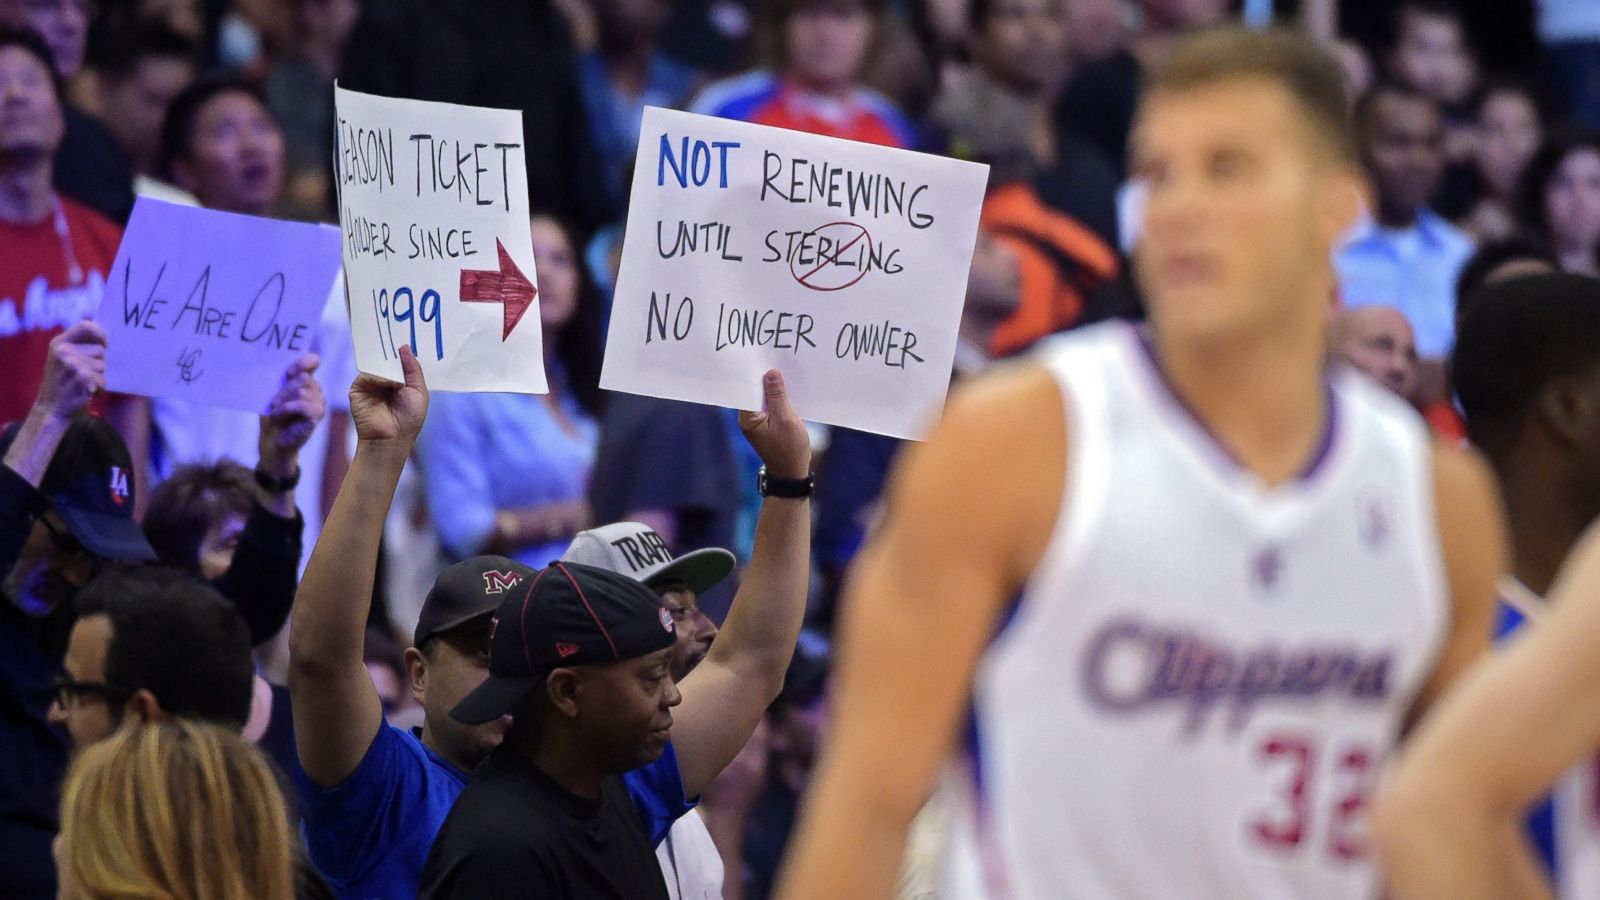 Clippers stage jersey protest amid Donald Sterling controversy